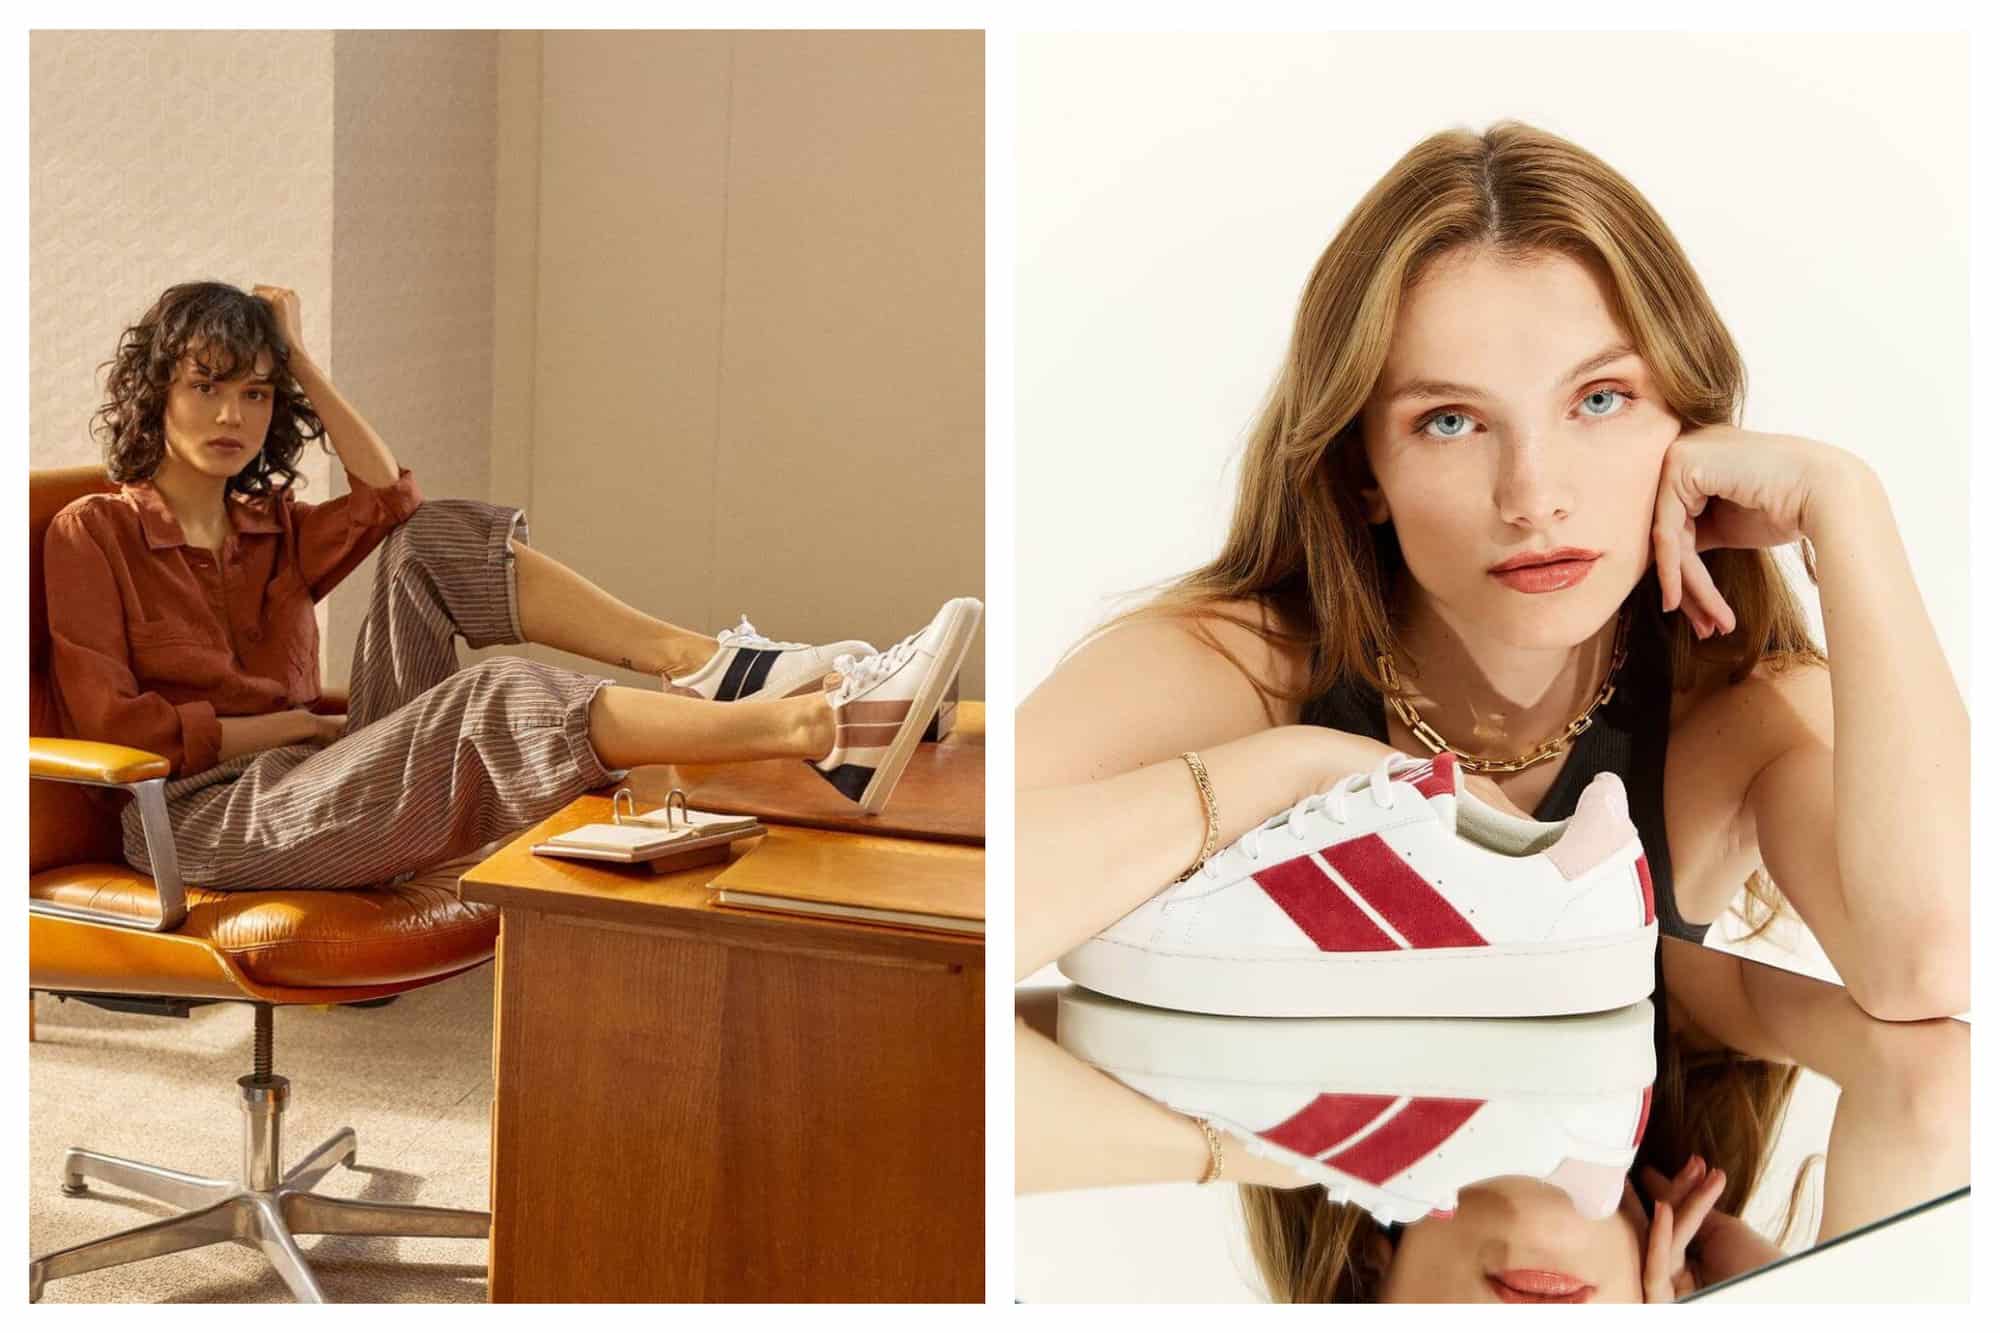 2 pictures from sustainable sneaker brand Caval. Left: A model is sitting in an office. The armchair and the table are both colored tan. She is wearing a terracotta colored long sleeved top with light brown pants and white sneaker with brown and white stripes. Right: A model with captivating blue eyes is seen with a white sneaker that is styled with red and pink stripes.